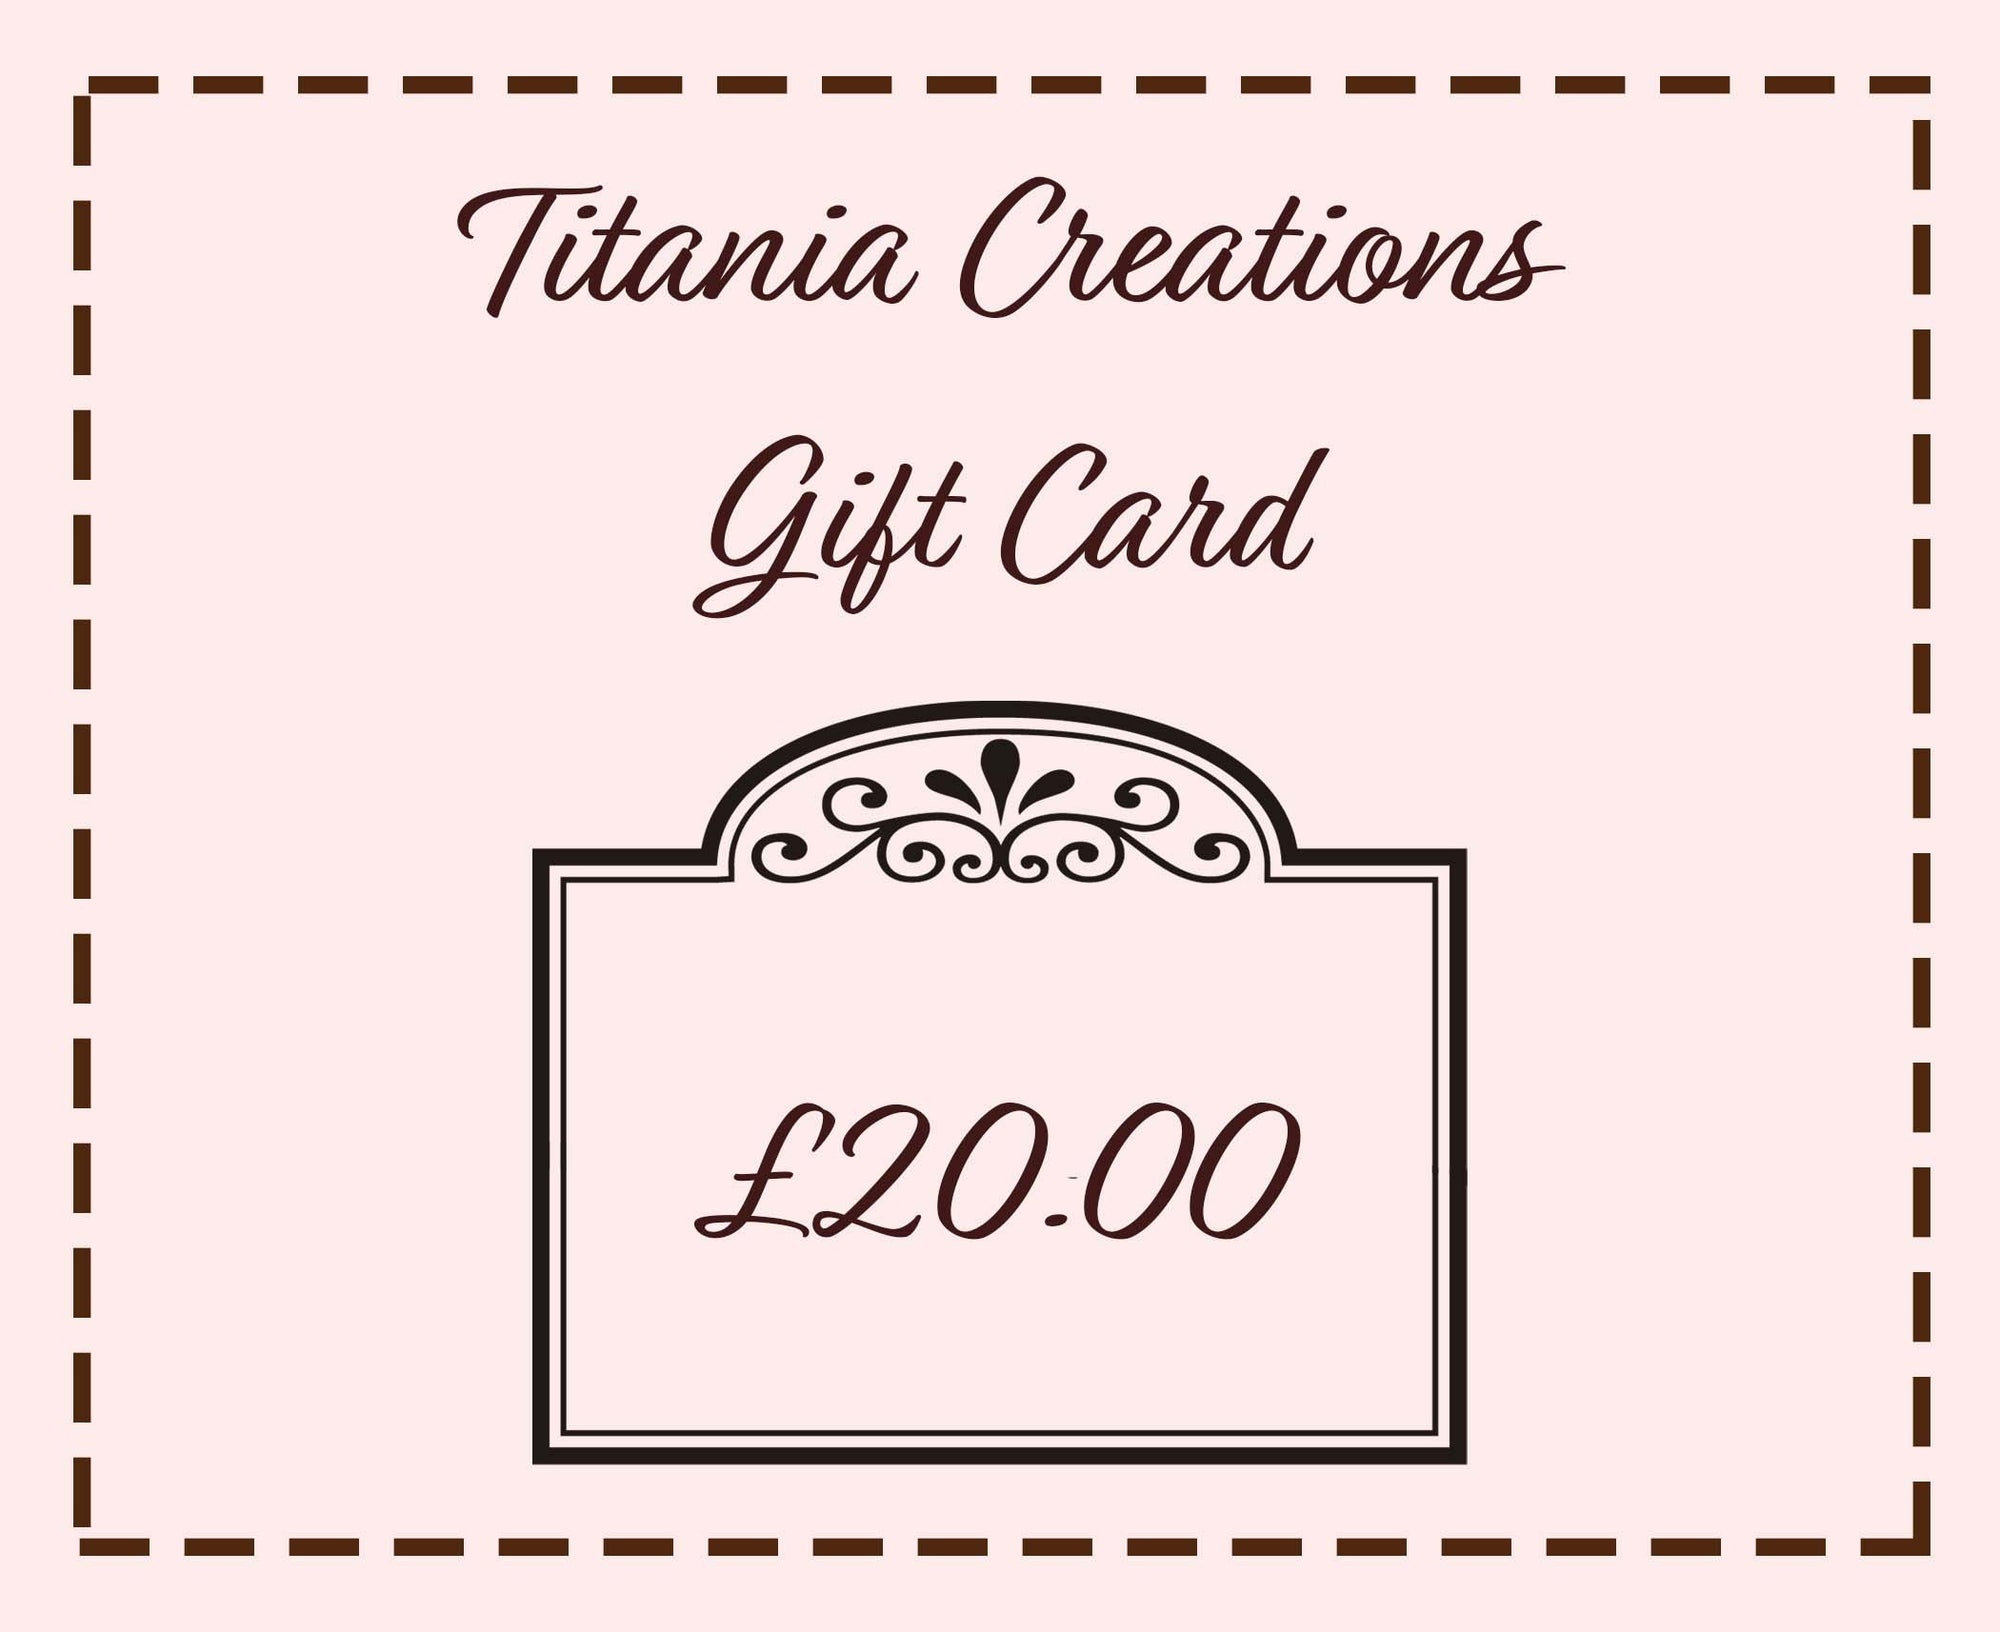 Gift Cards £20.00 Card